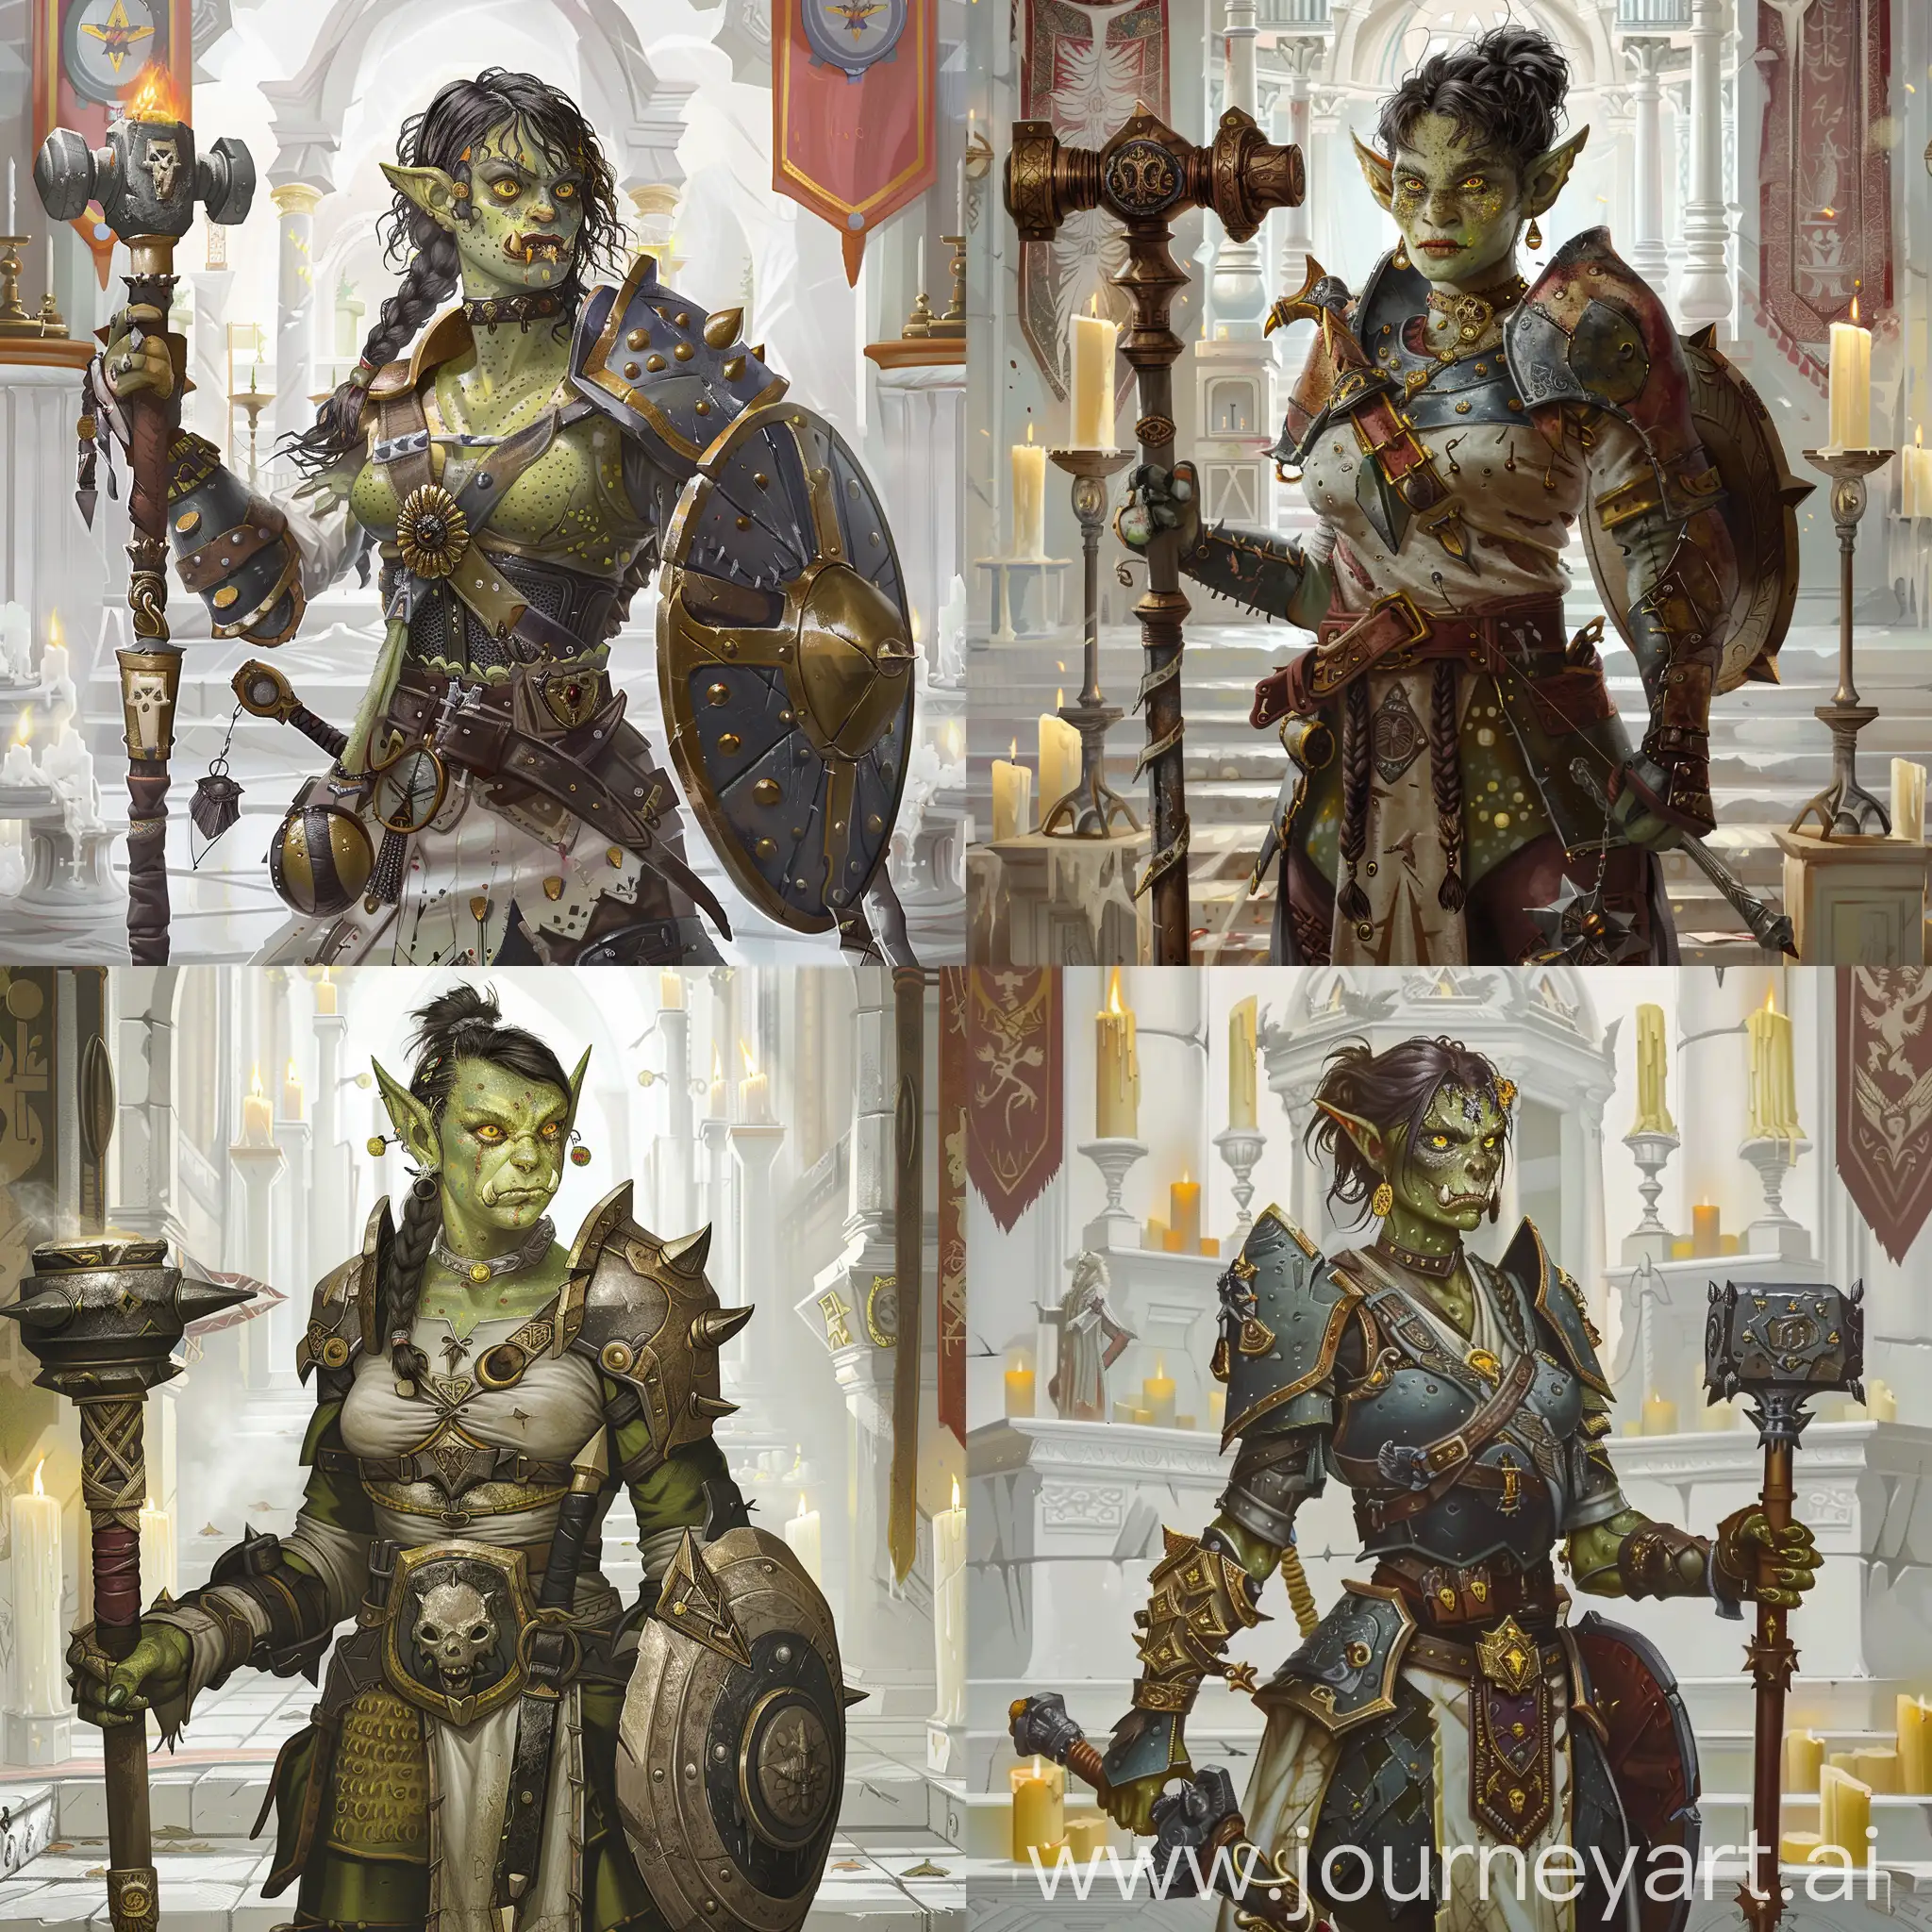 Draw a character from the Dungeons and Dragons universe according to the following description: she is female orc priest, dressed in medieval warrior clothes. She has a mace and a shield. She has green skin with freckles, yellow eyes, short black hair with little braid. Sharp fangs are visible from under the lower lip. White temple, candles and tapestries on background